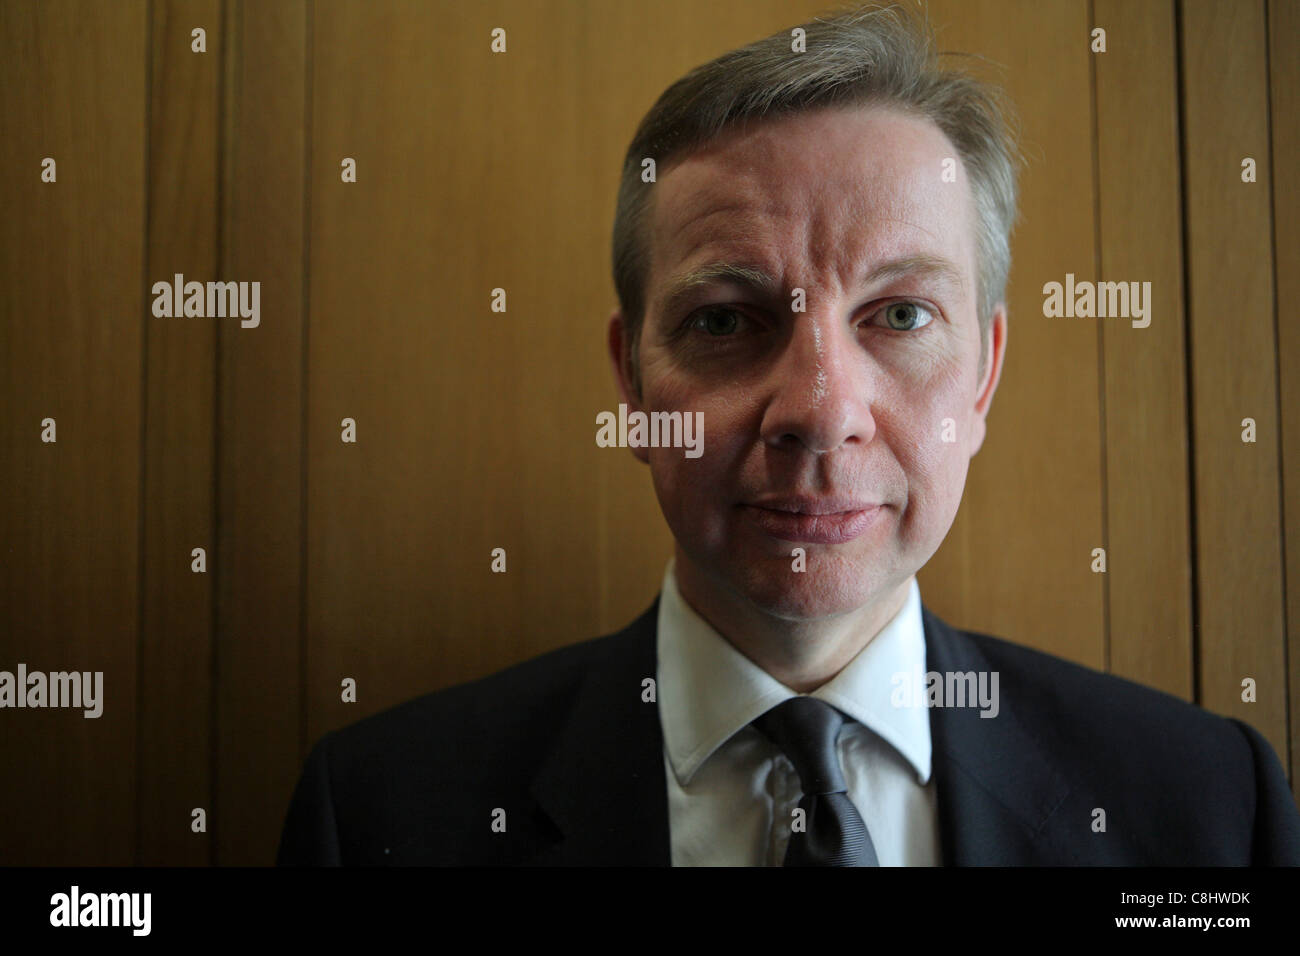 Michael Gove, Secretary of State for Education, Conservative politician & MP for Surrey Heath, Westminster, London, UK Stock Photo